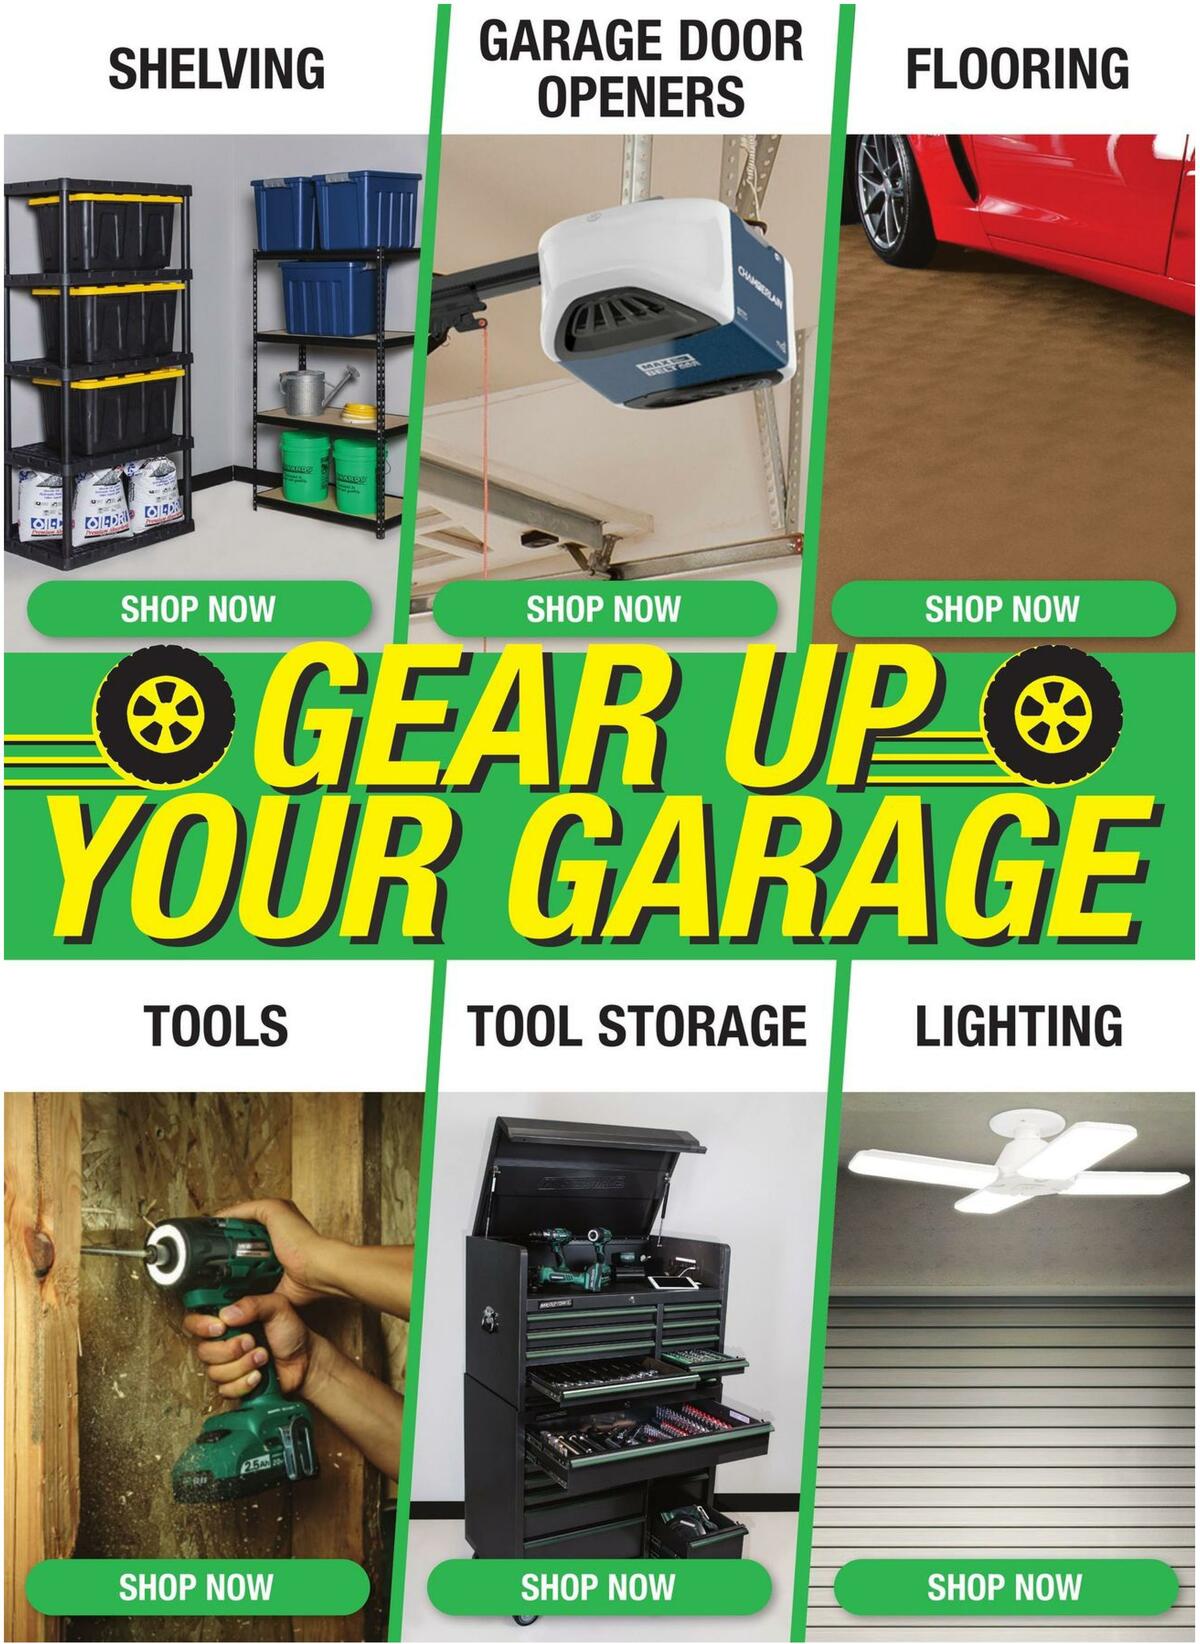 Menards Weekly Ad from March 24